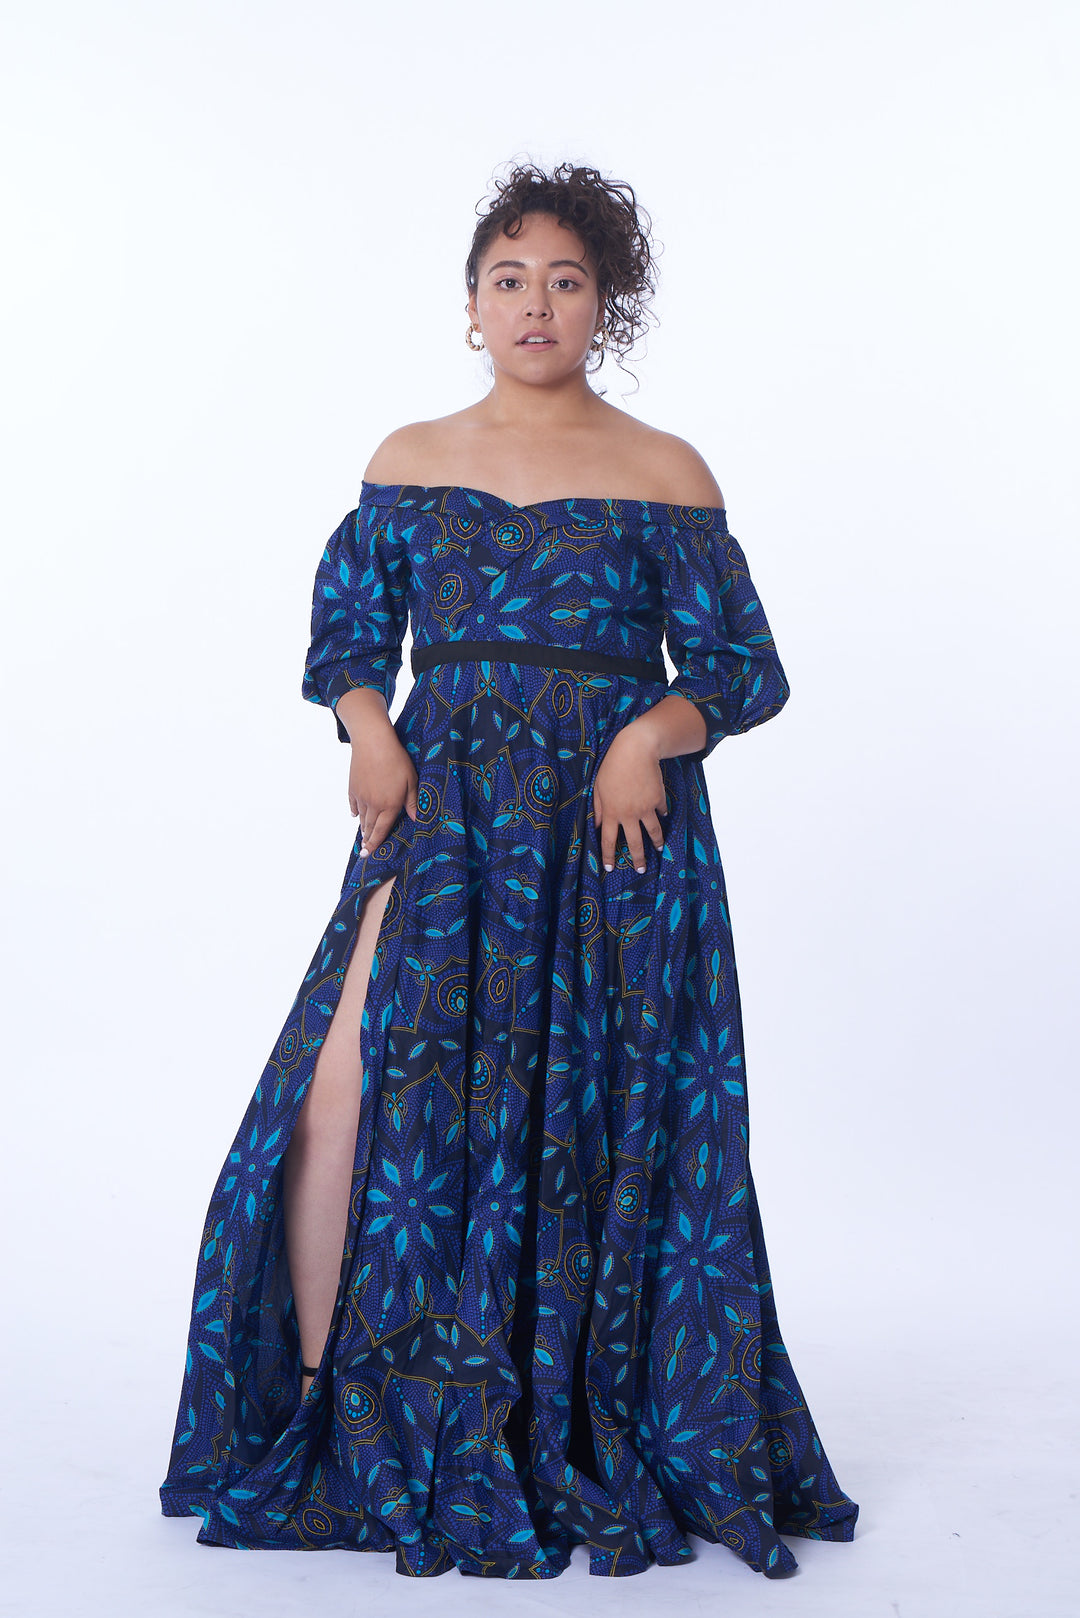 Photo of a woman wearing myObioma's long and blue Pokou Dress. The dress includes a slit thigh and off-shoulder puffy sleeves, while being filled with deep blue patterns and golden accents. It also includes a thin, black belt around the waist.